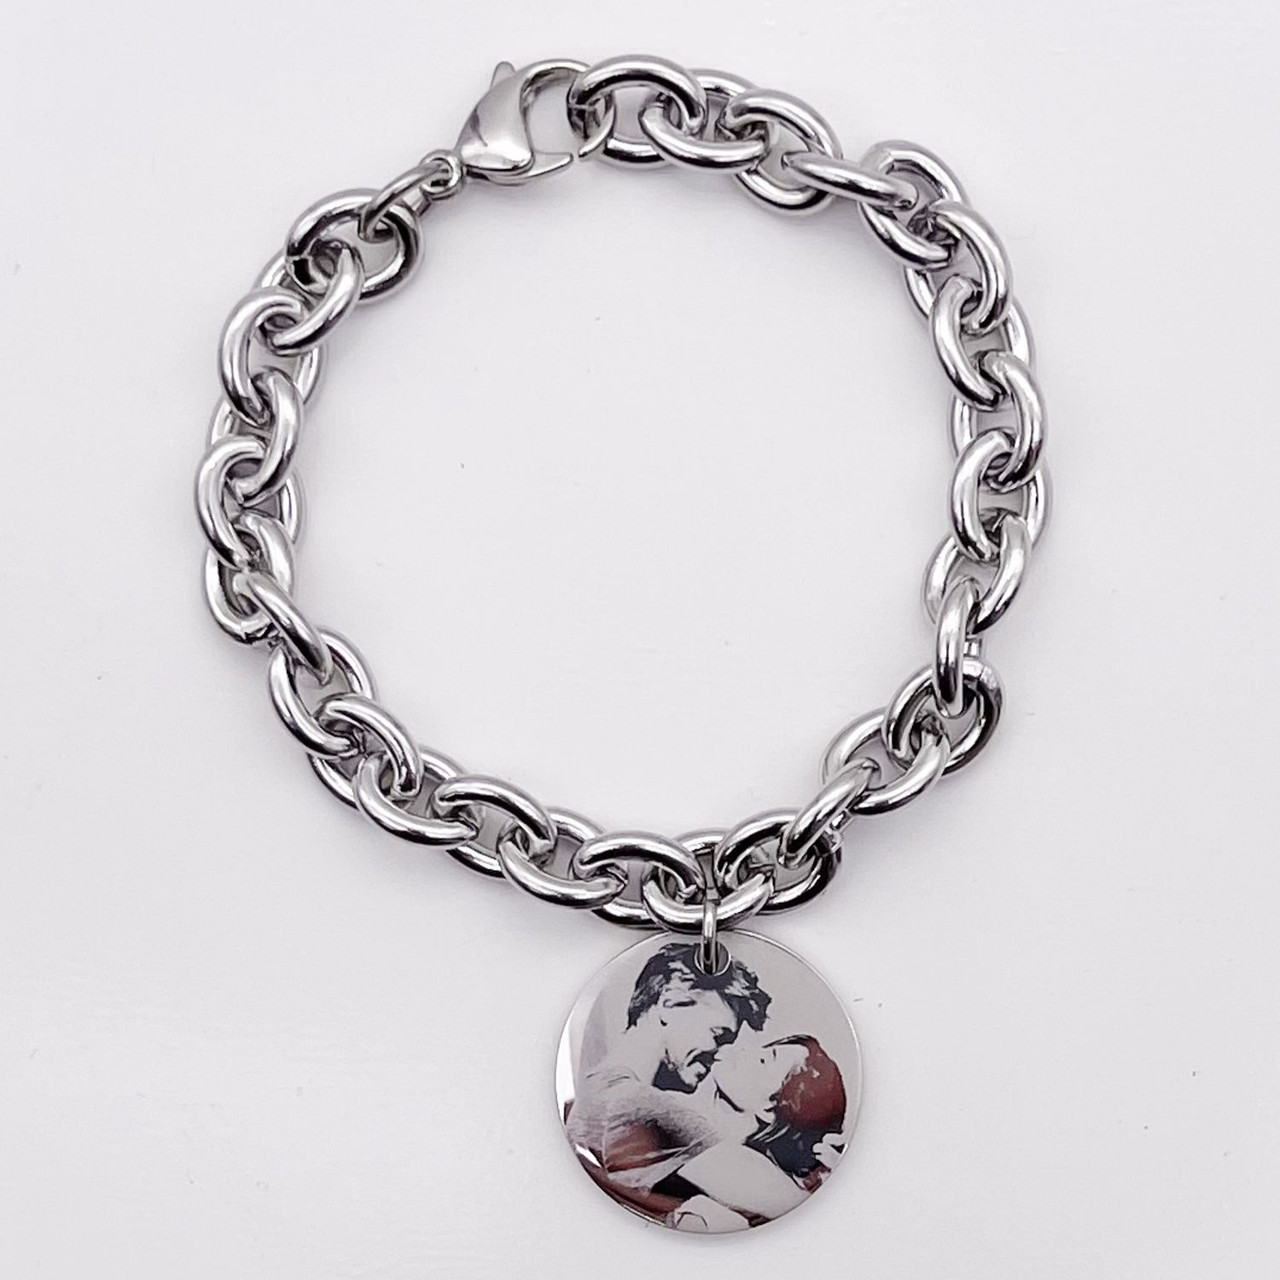 Personalized Quality Stainless Steel Bracelet with Round Charm ...